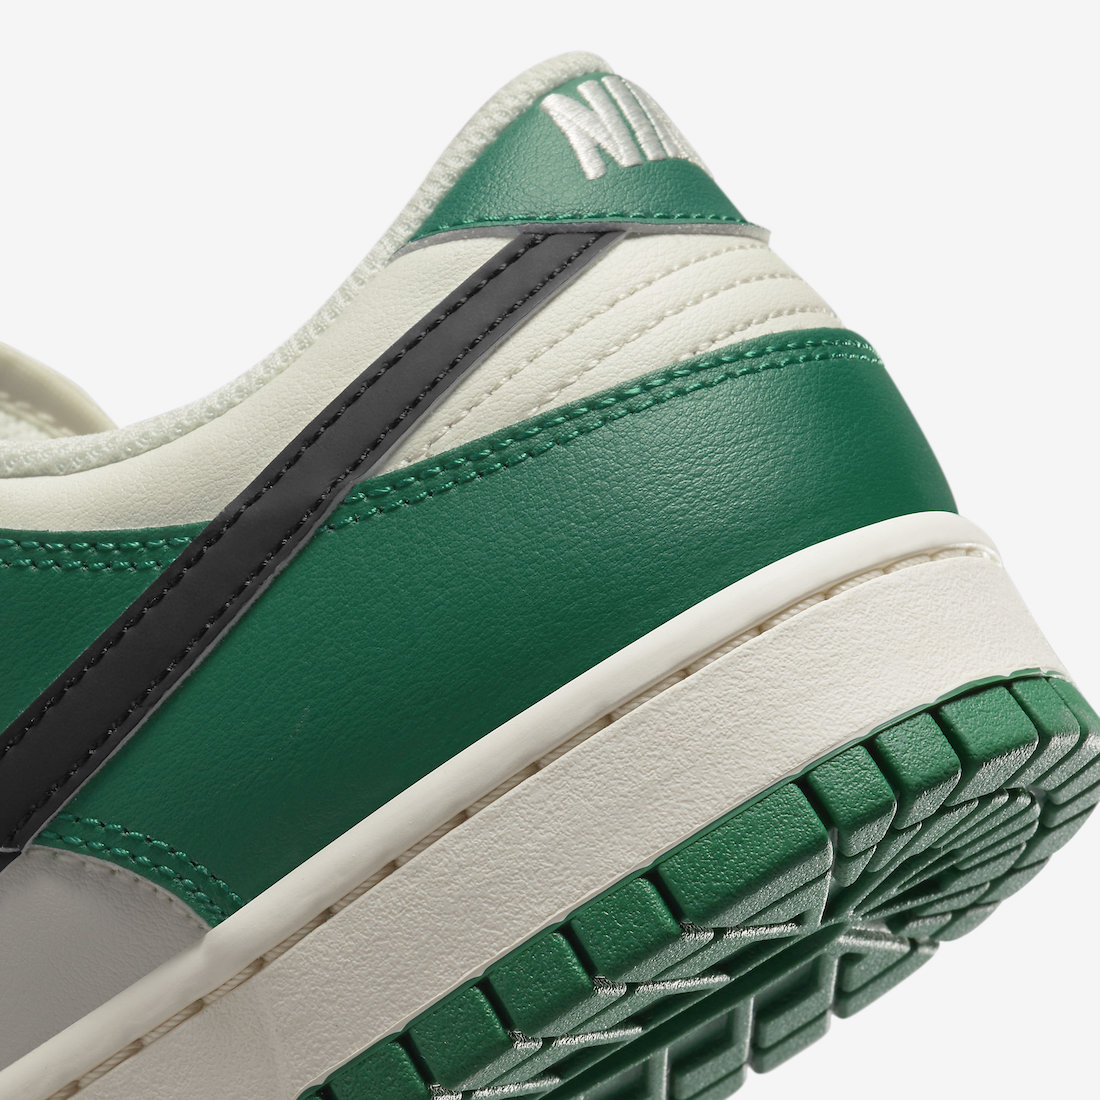 Nike Dunk Low Lottery Pale Ivory Malachite DR9654-100 Release Date